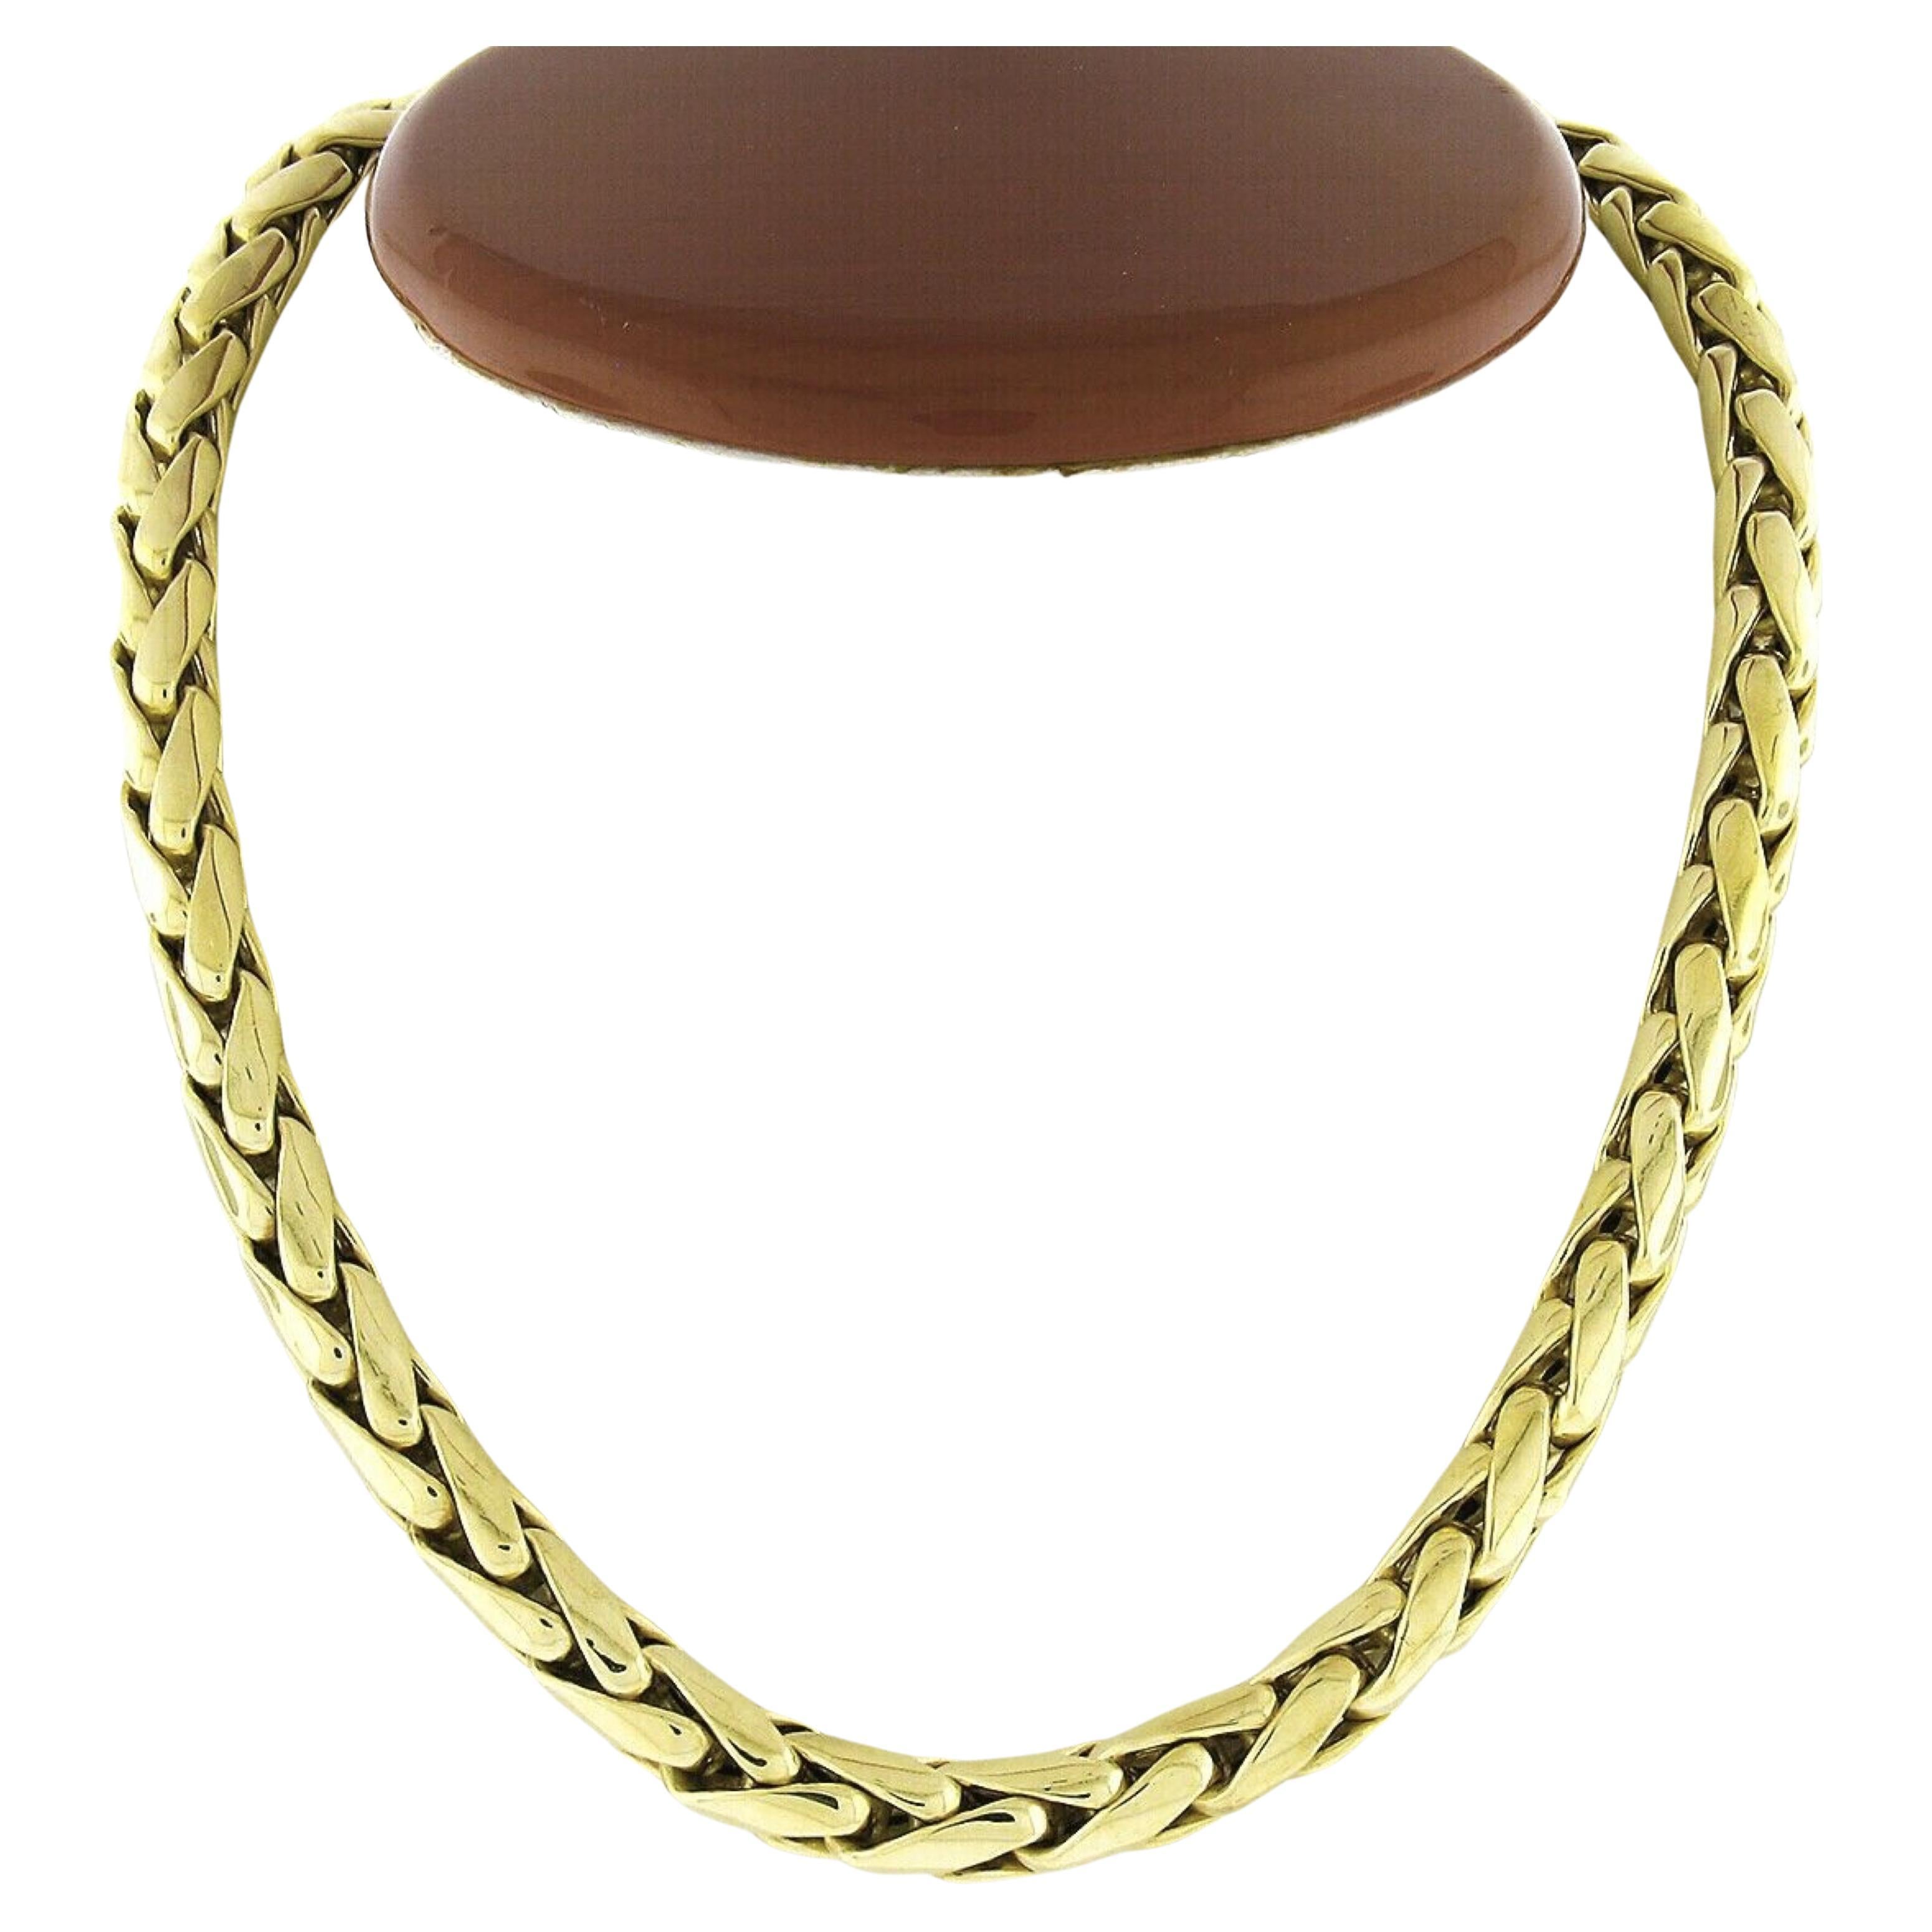 18K Gold Wide Polished Wheat Link Chain Necklace w/ Lobster Clasp